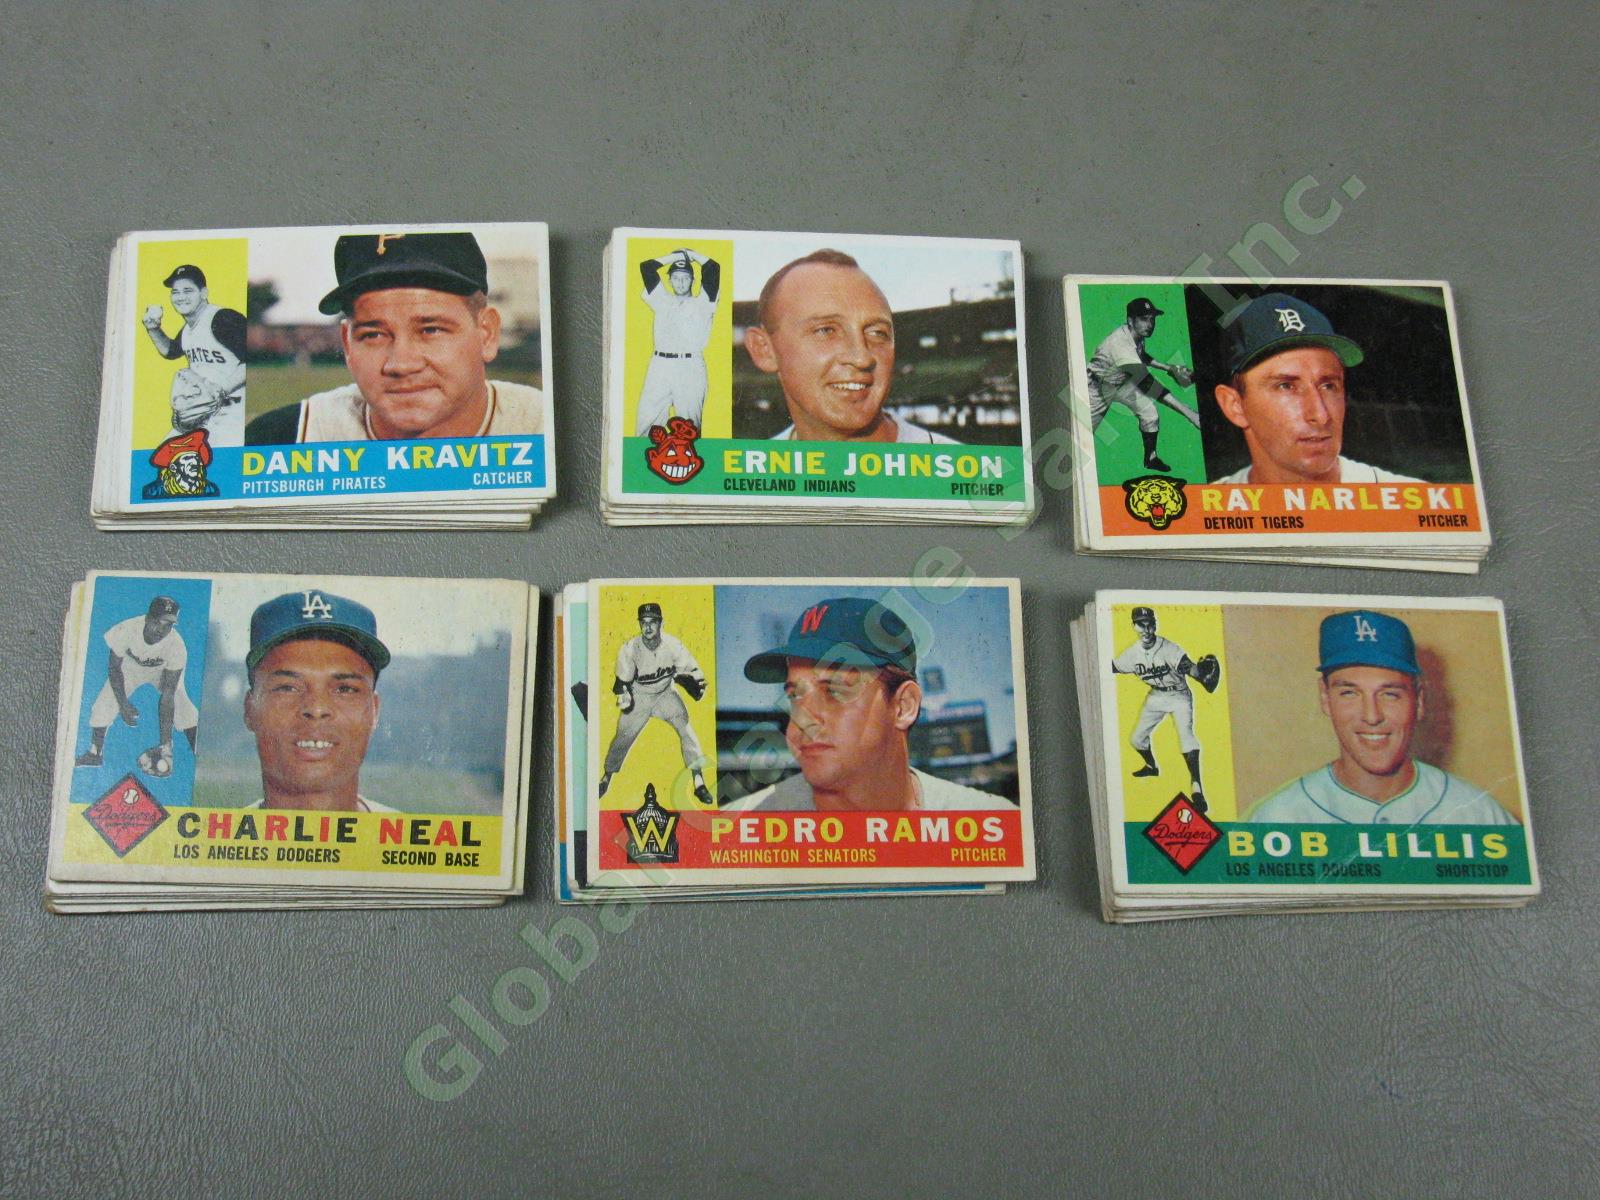 248 Vintage 1960 1960s Topps Baseball Card Lot Rookie Stars Teams Managers NR! 9